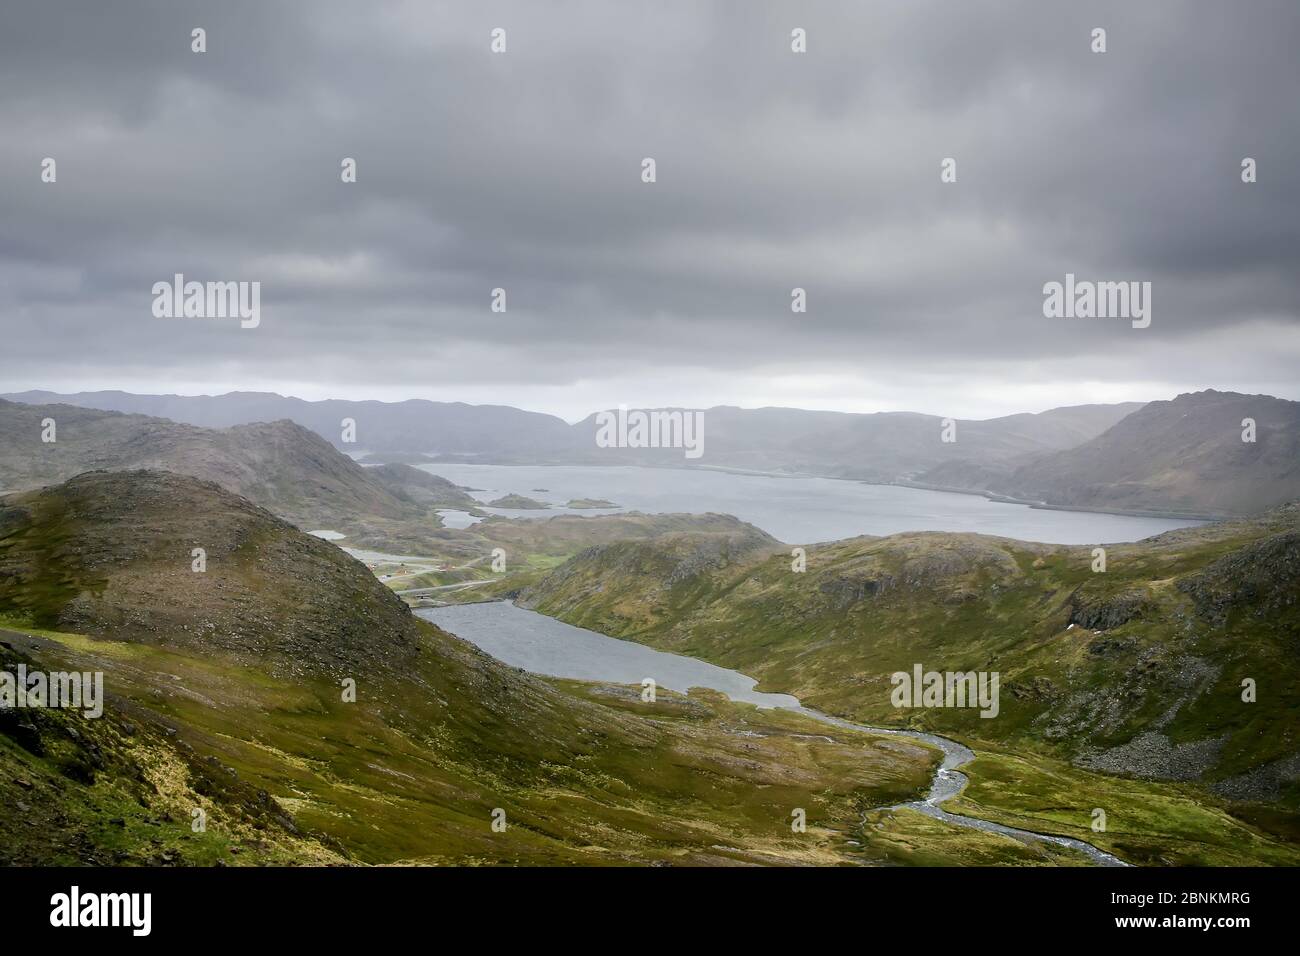 Beautiful remote & barren landscape on the island of Mageroya, Troms og Finnmark county, in the extreme northern part of Norway. Stock Photo